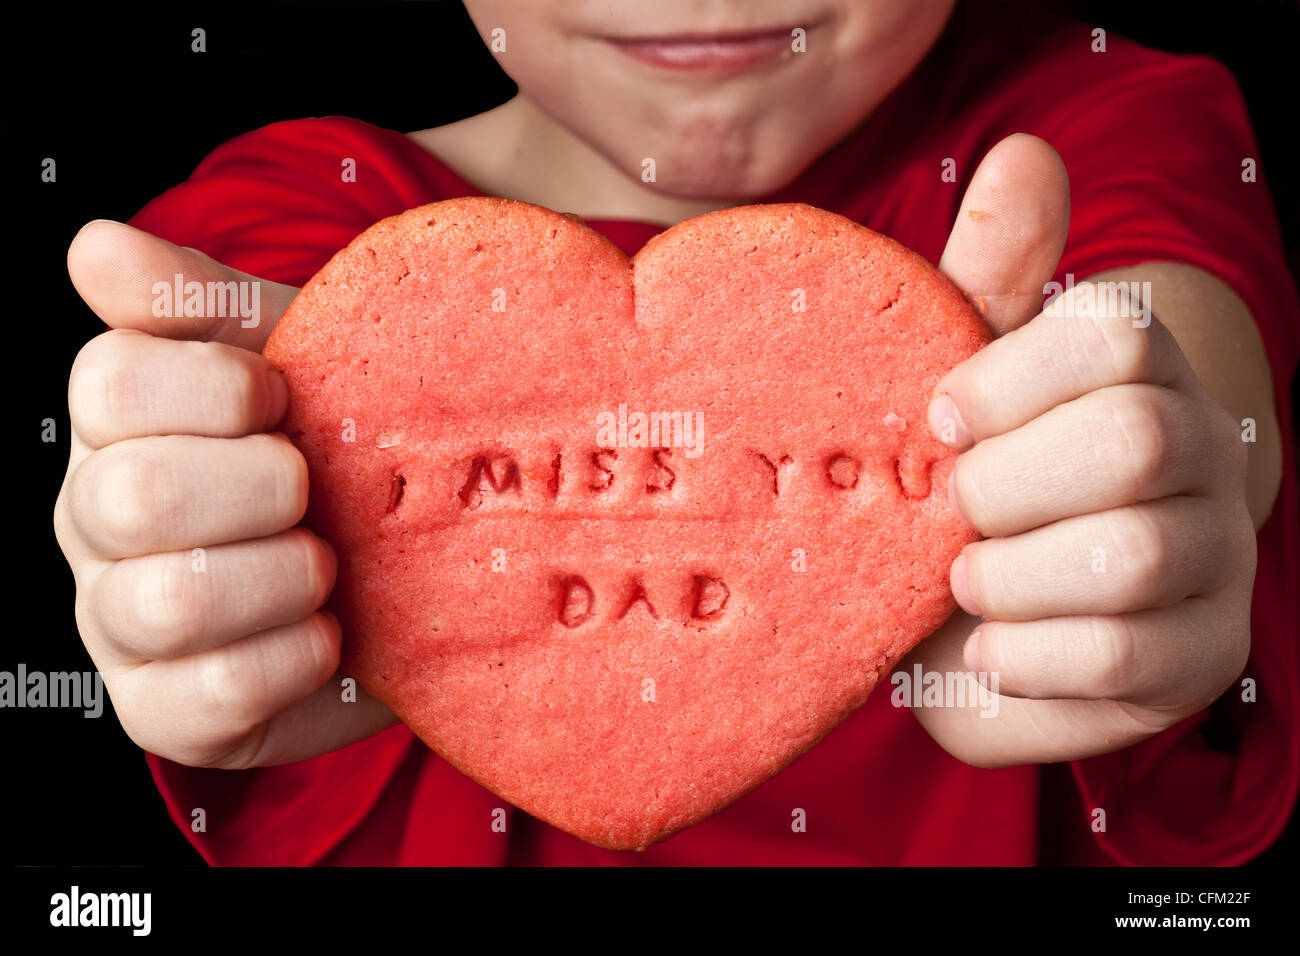 little boy holds red heart shaped cookie which reads 